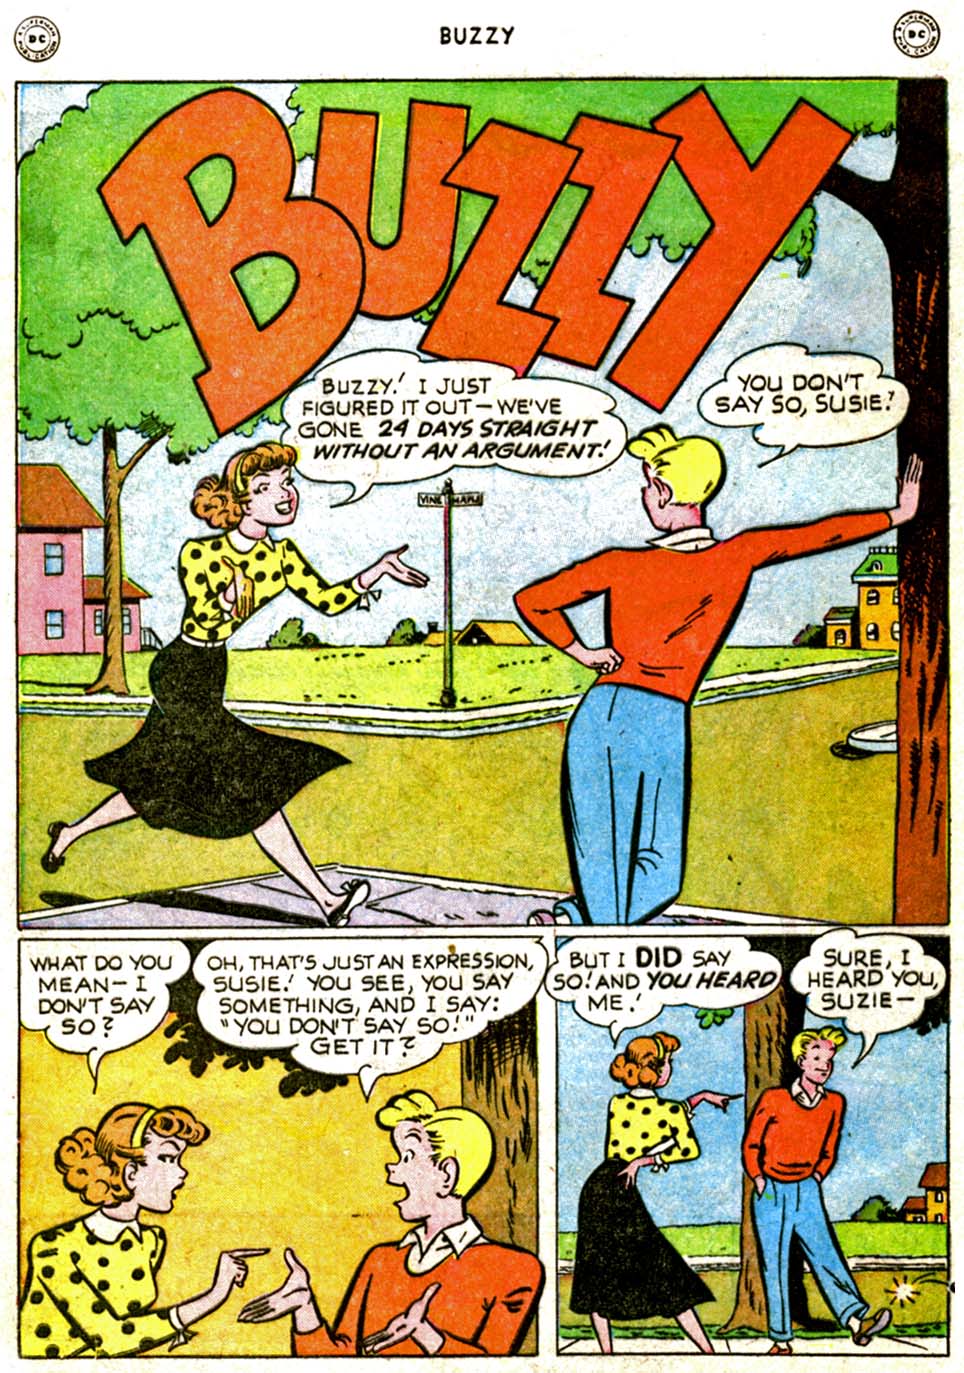 Read online Buzzy comic -  Issue #27 - 10